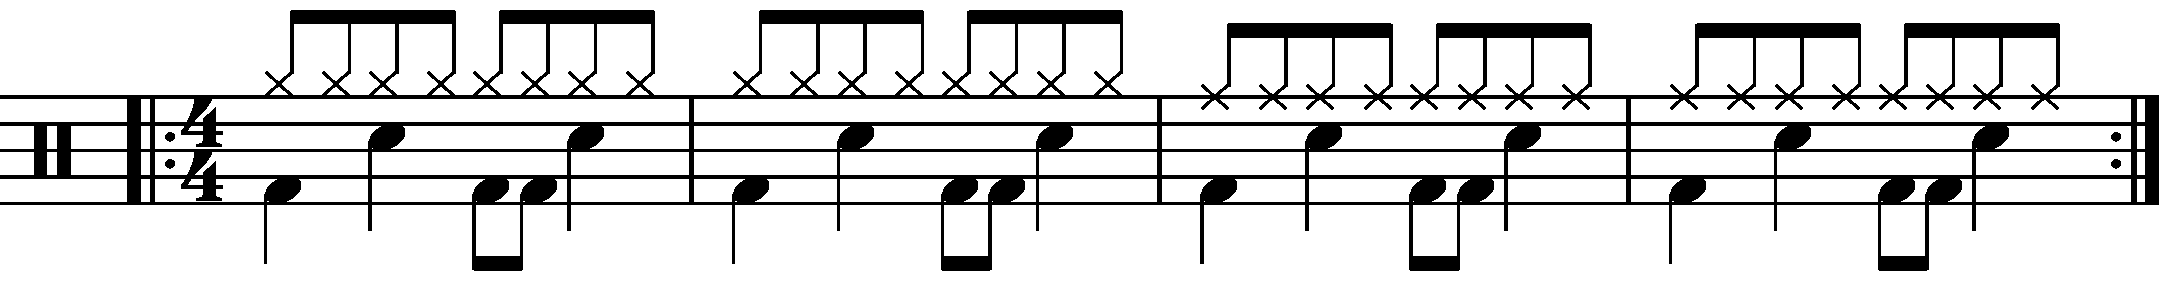 Rhythm of the first groove